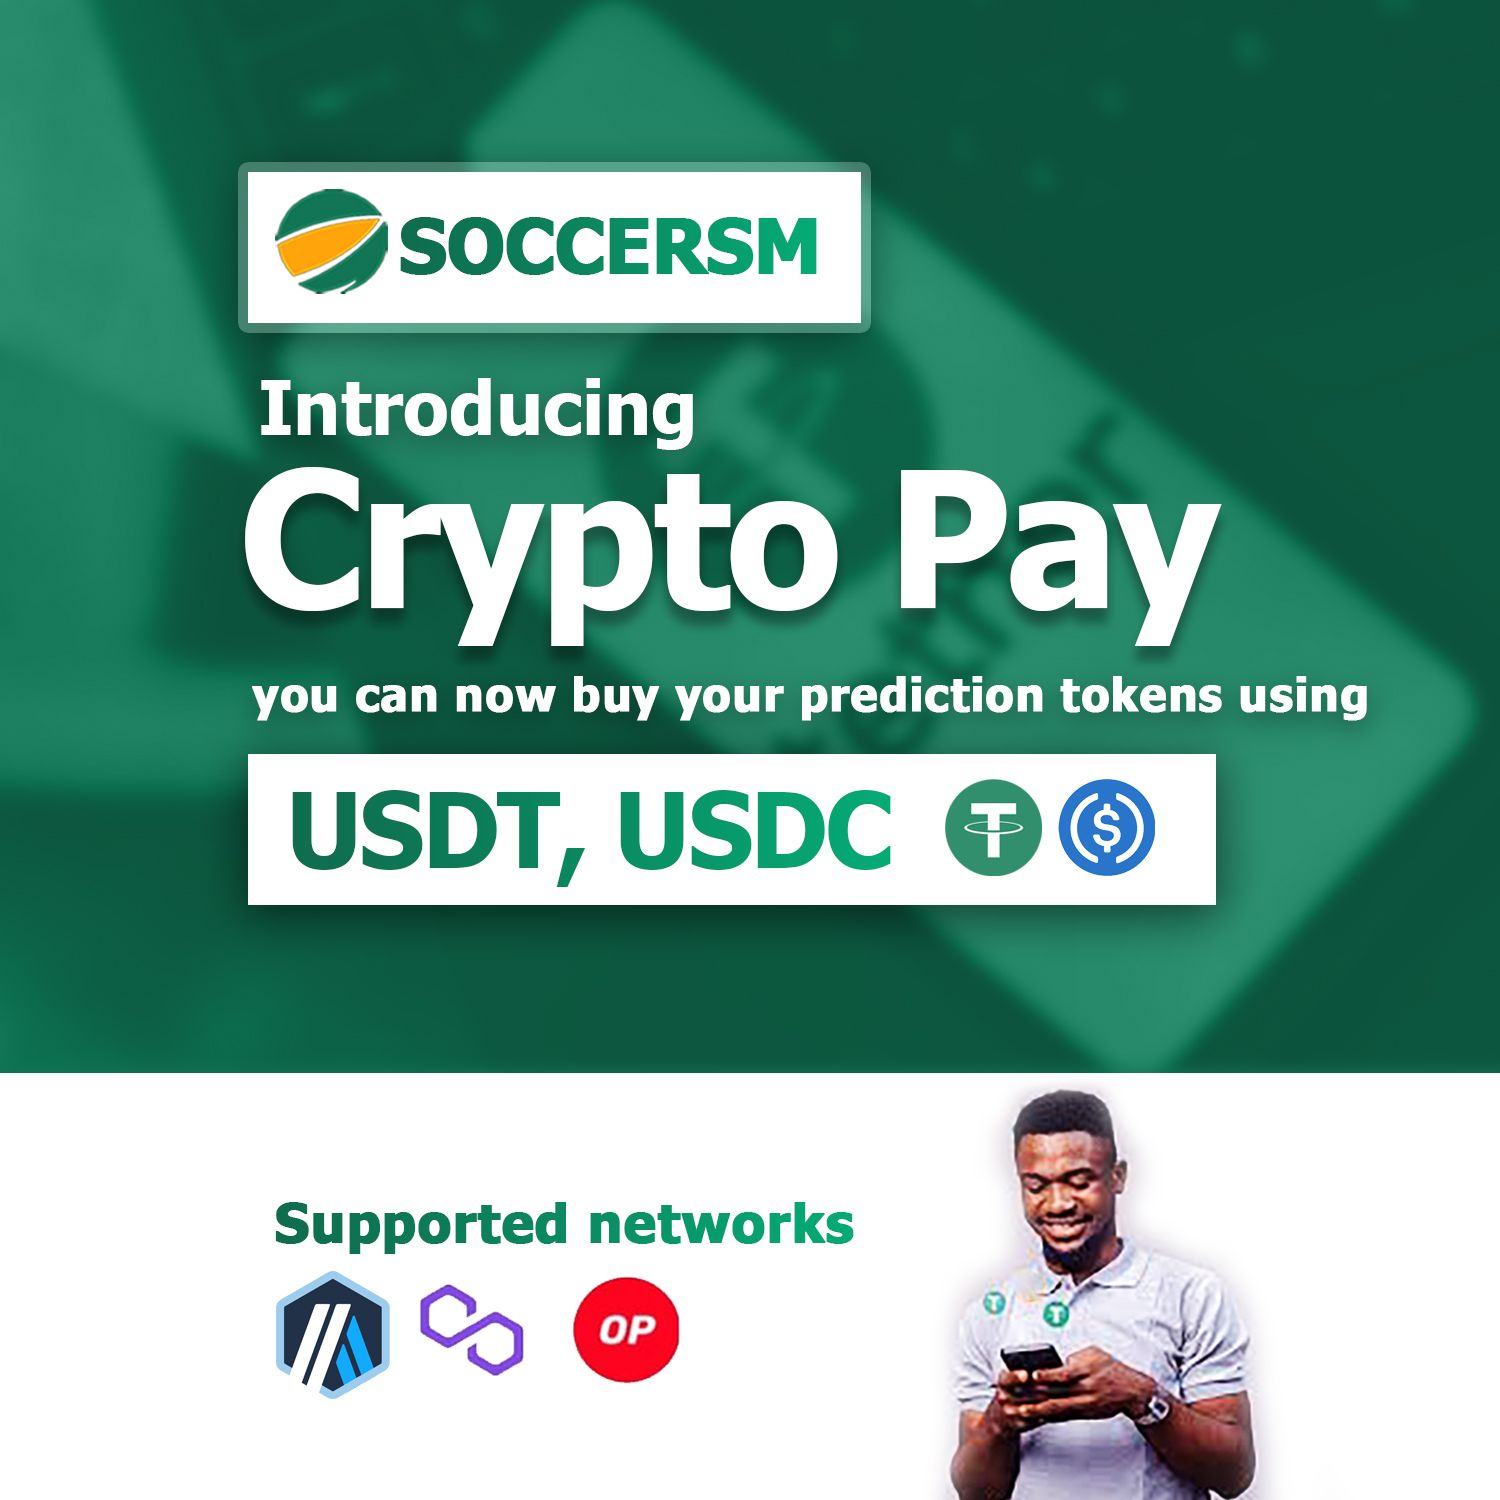 You can now buy Soccersm tokens with Crypto!